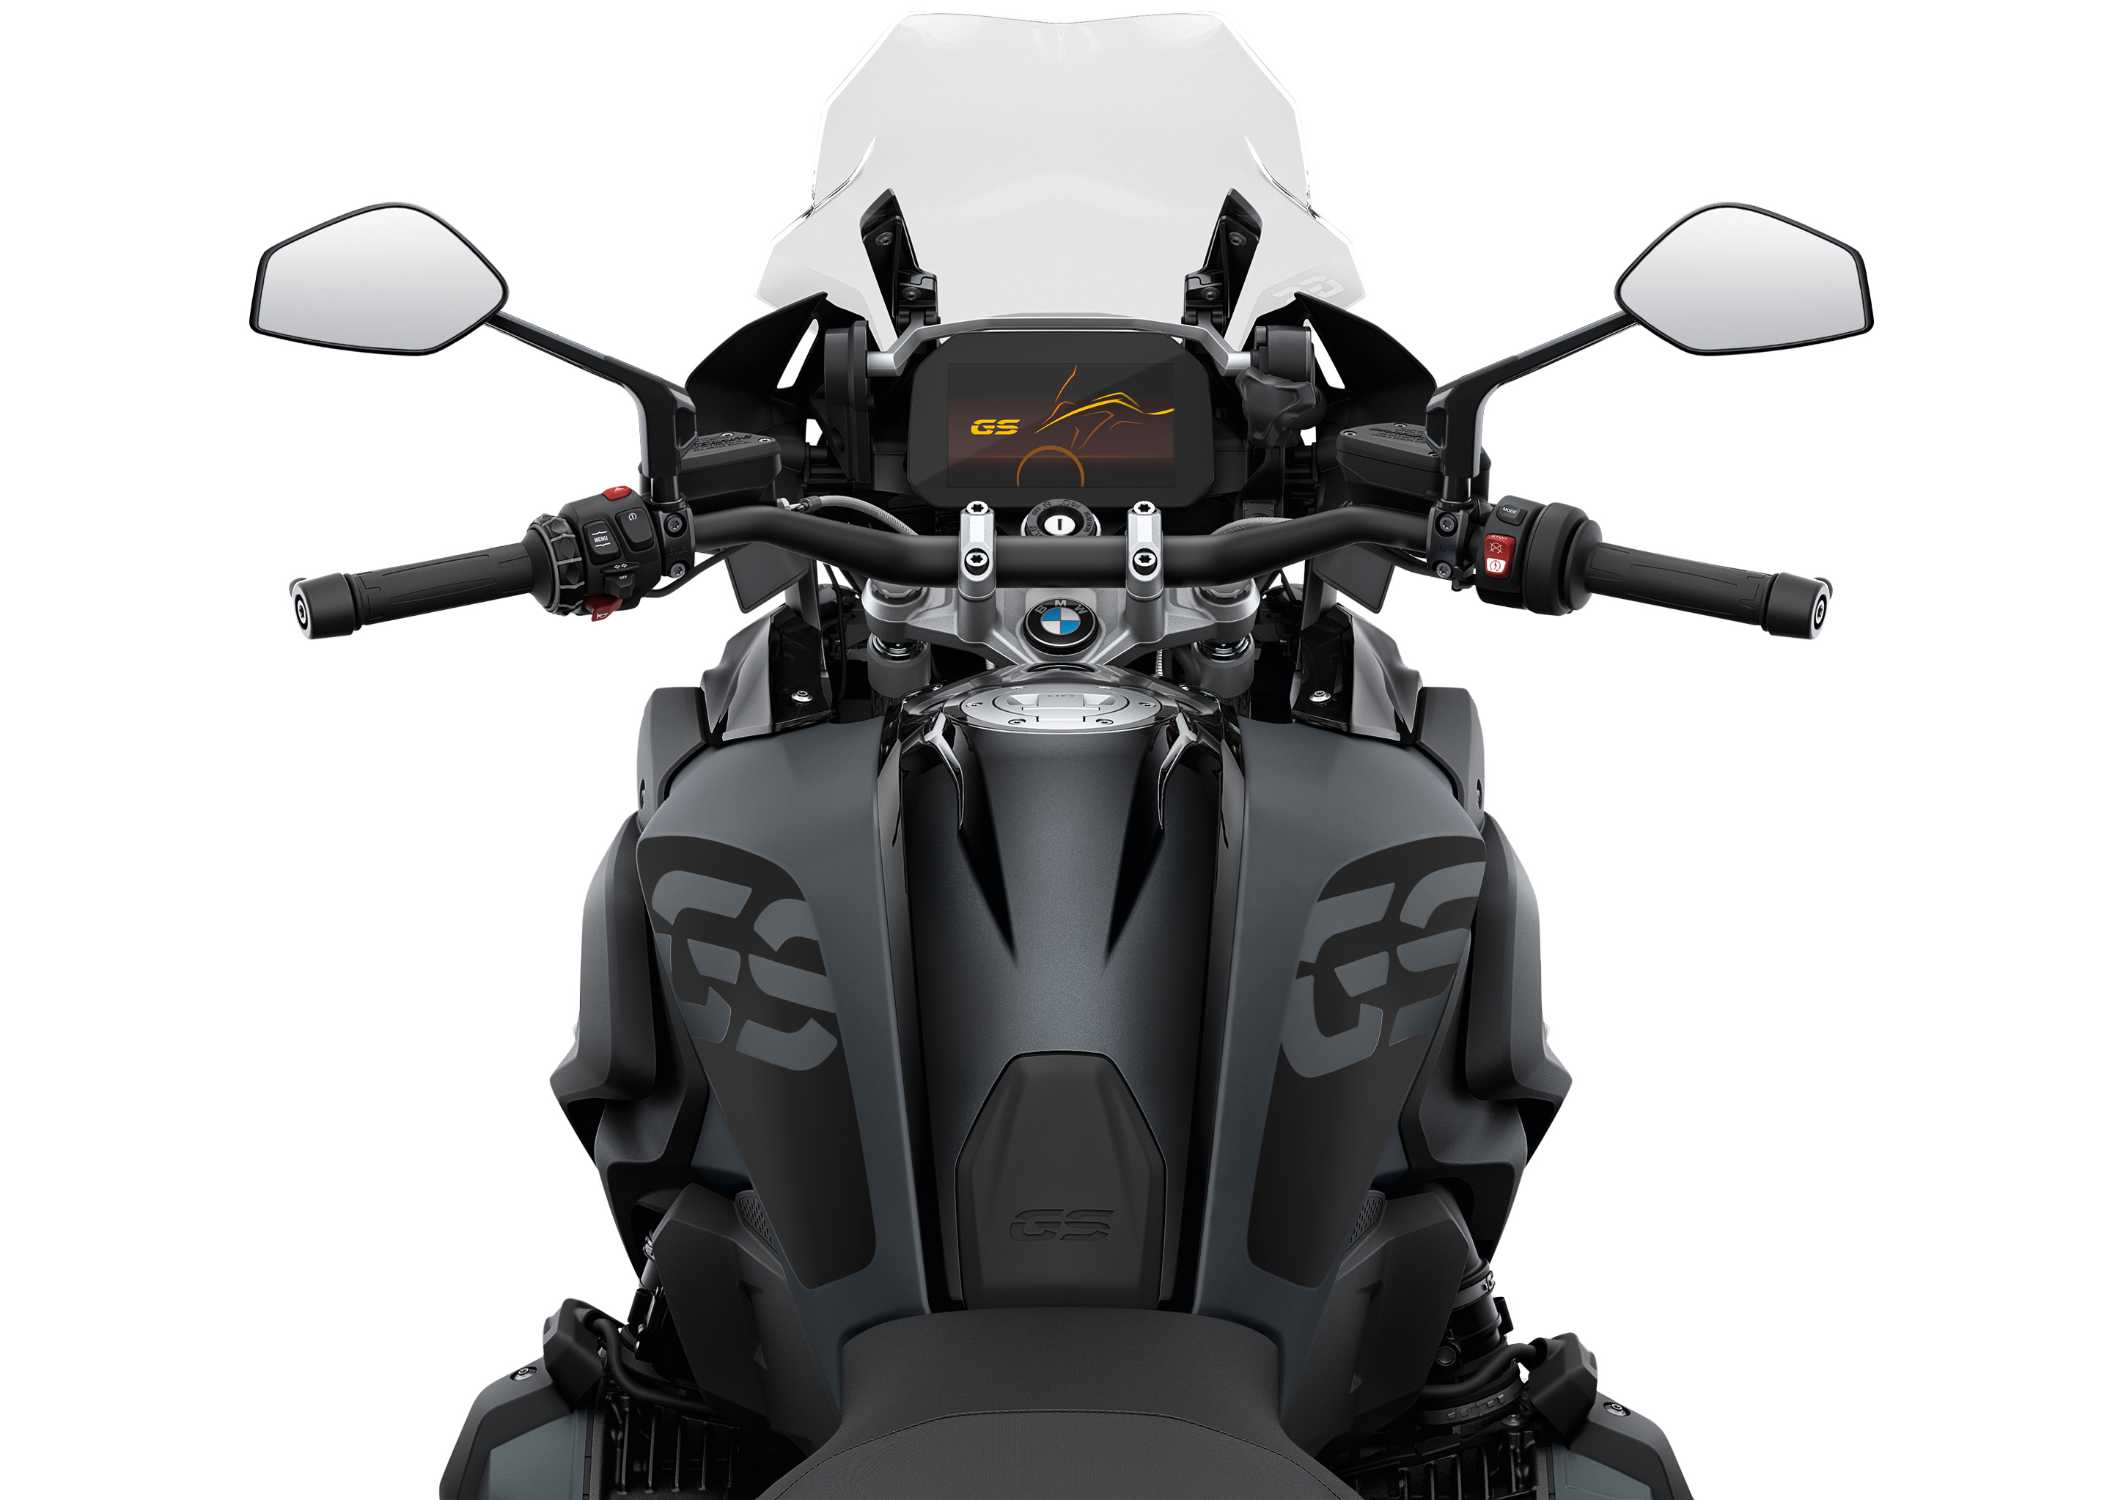 Studio takes of the new BMW R 1250 GS, Style Triple Black